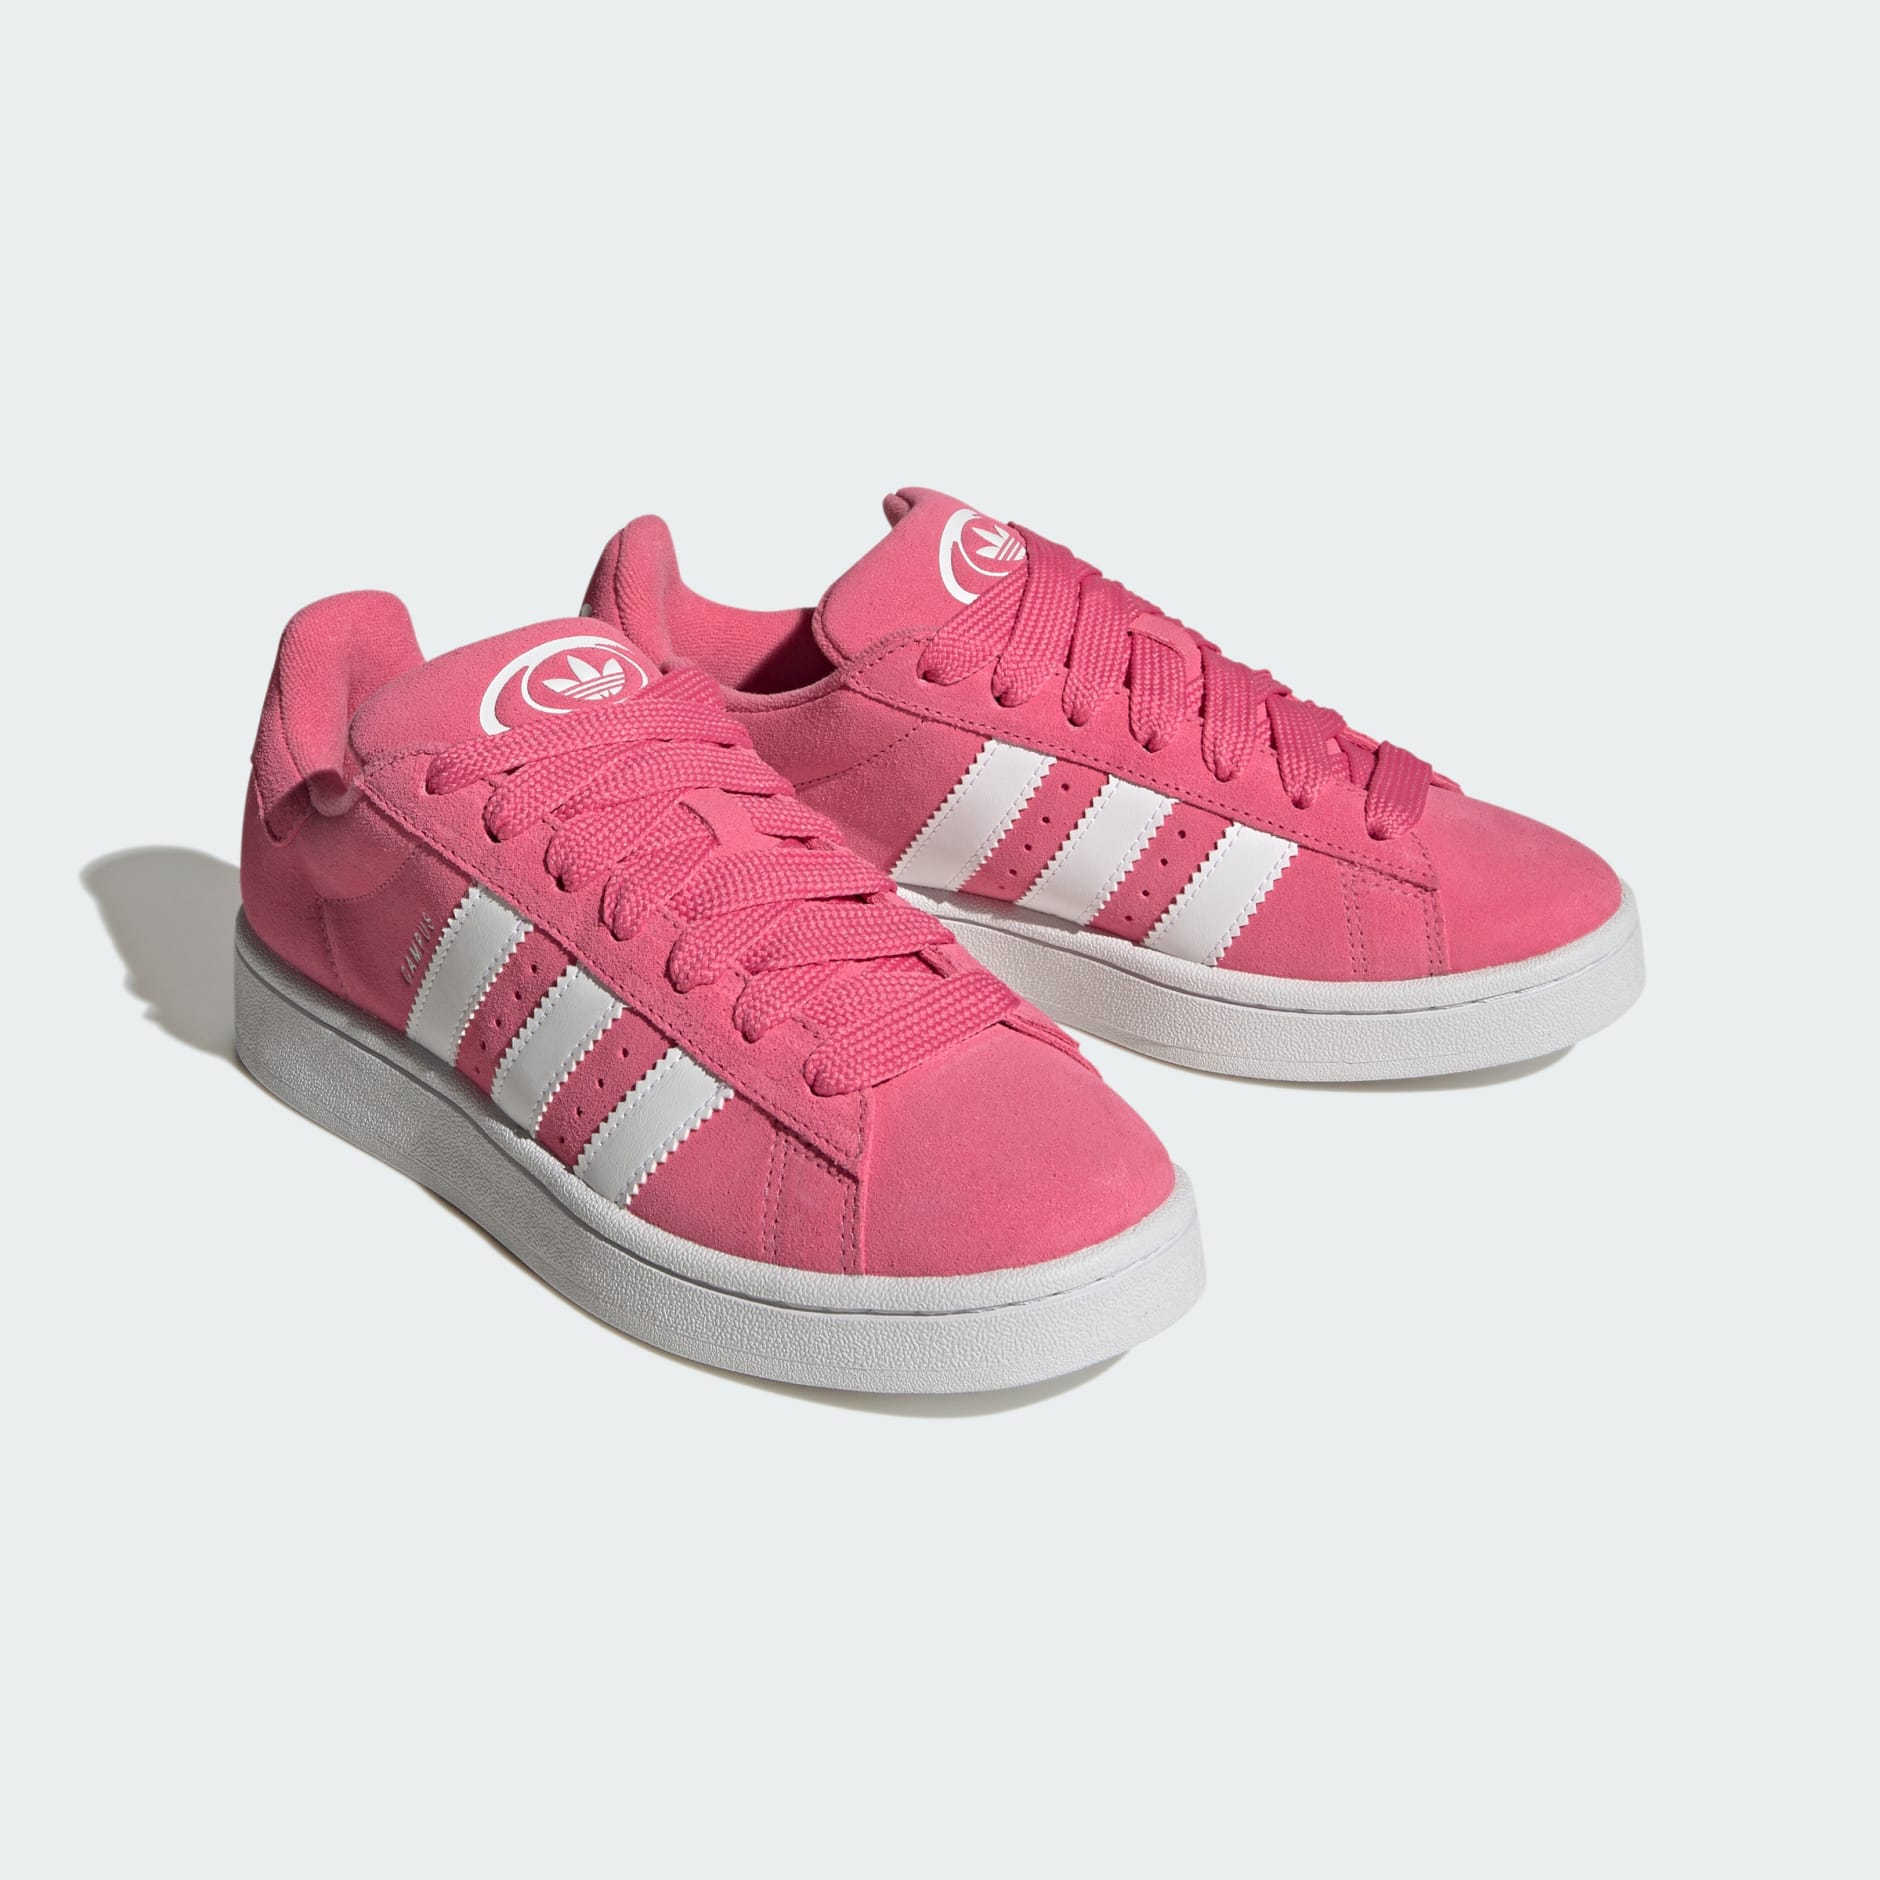 00s - Campus adidas | Oman Shoes Women\'s Shoes - Pink